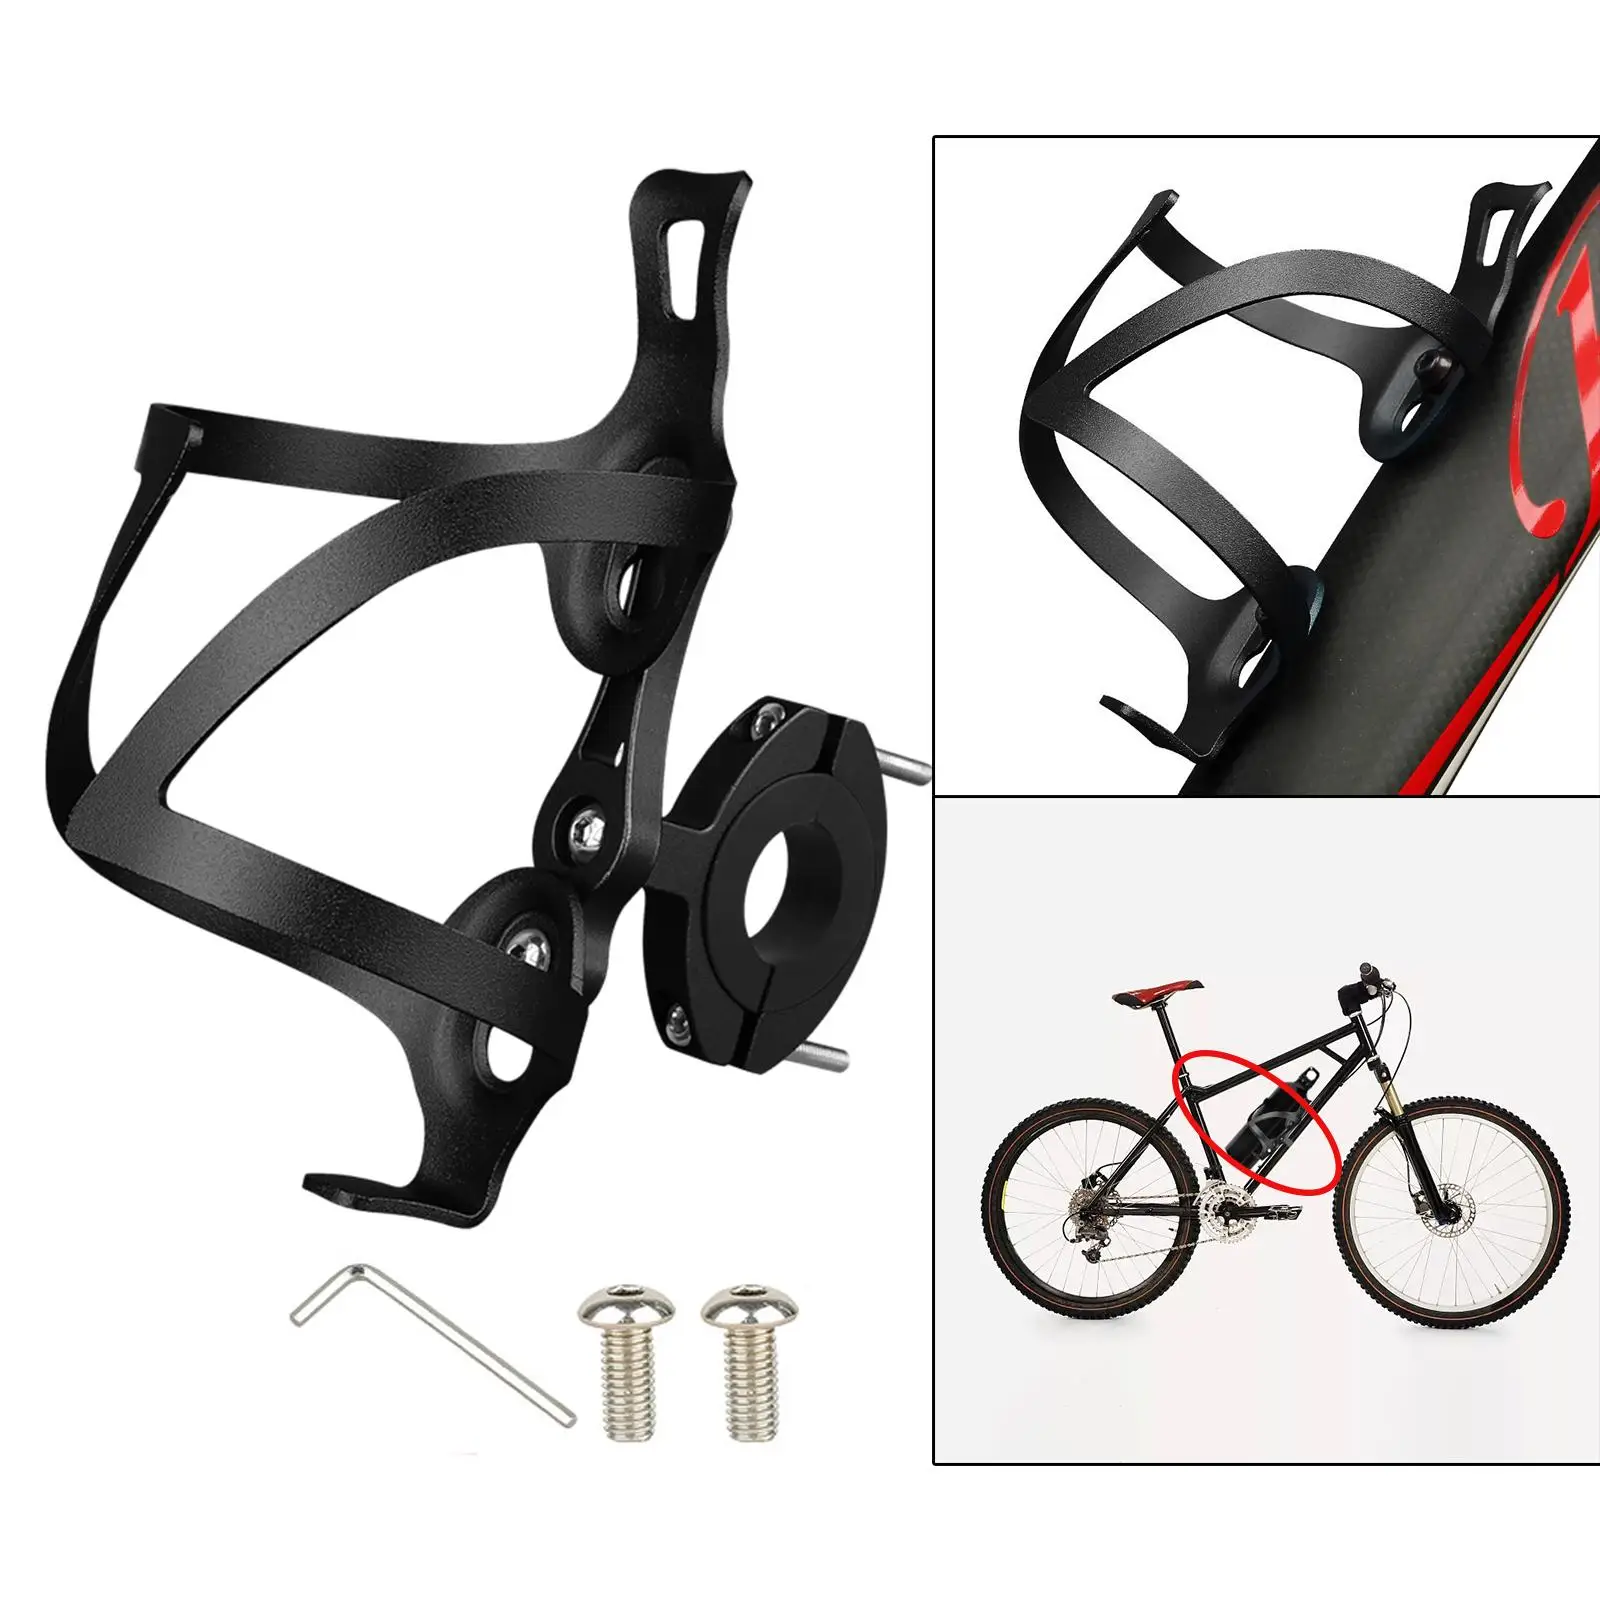 Aluminu Alloy Drink Water Bottle Cage Holder Mount Rack for Beverage Cycling